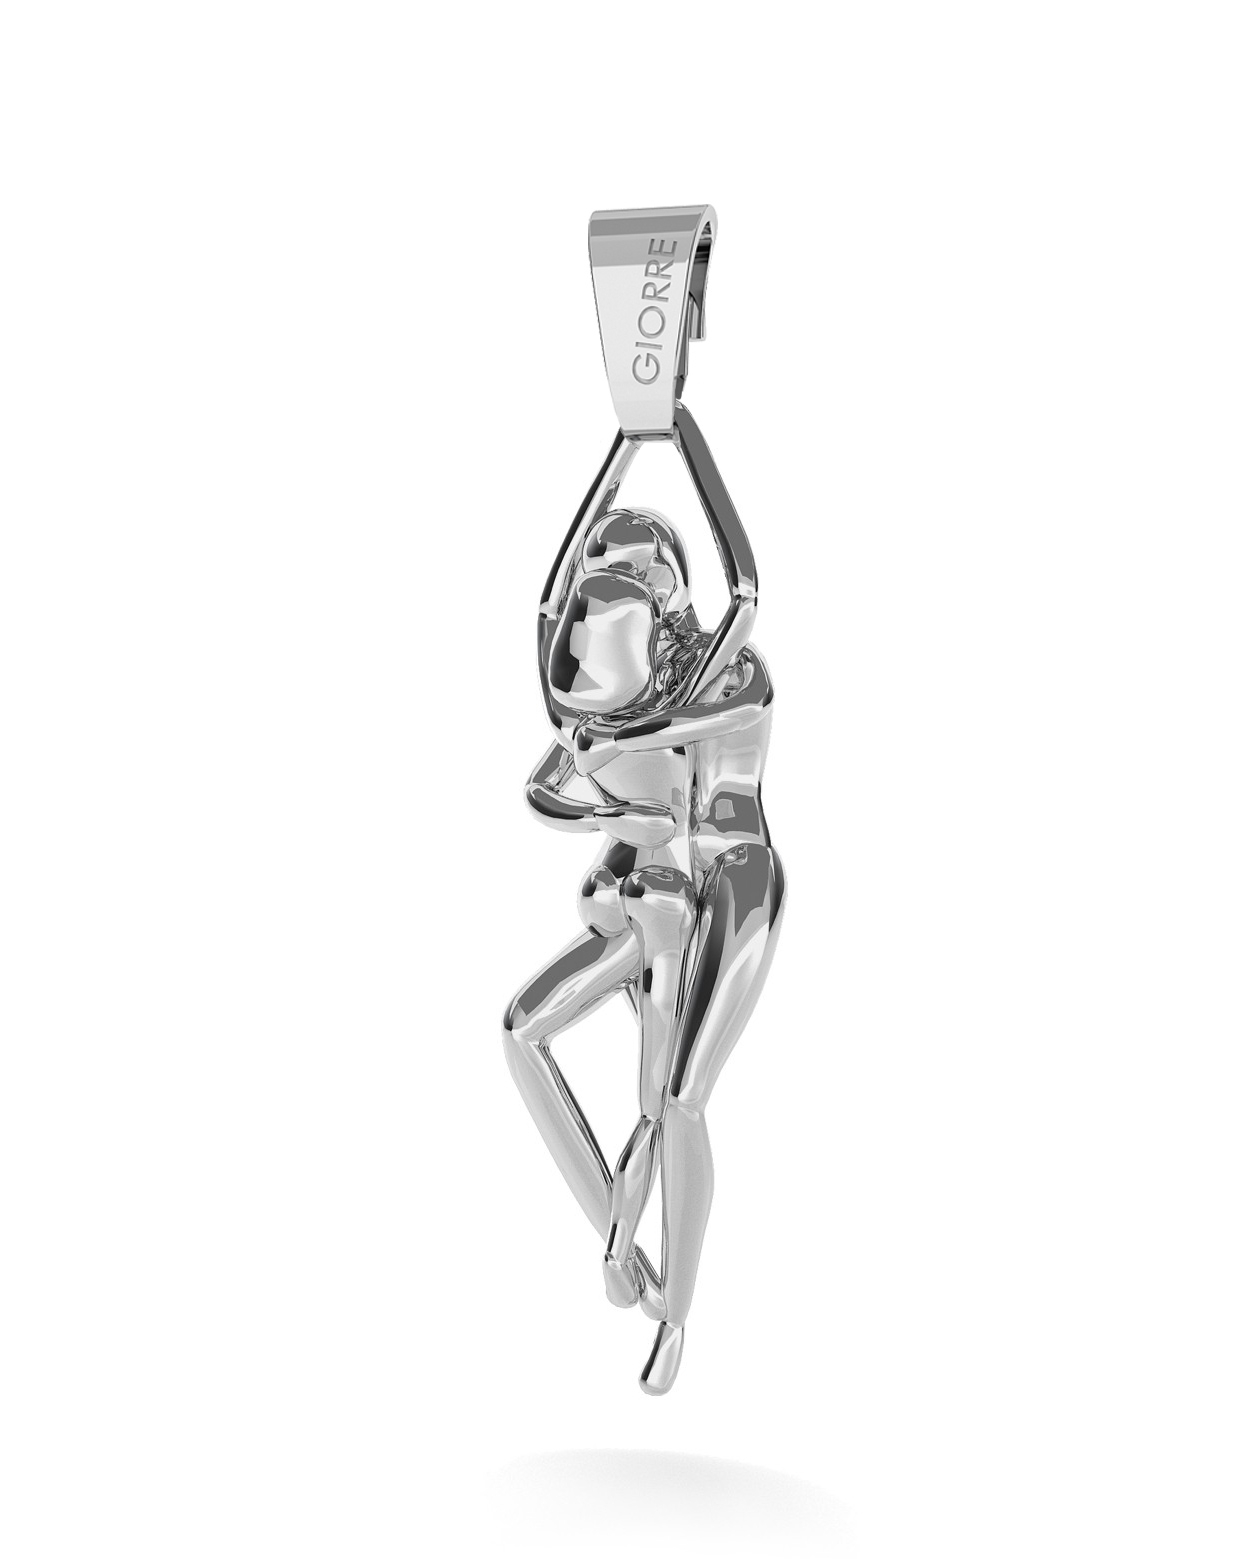 CHARM 37, LOVERS, SILVER 925,  RHODIUM OR GOLD PLATED